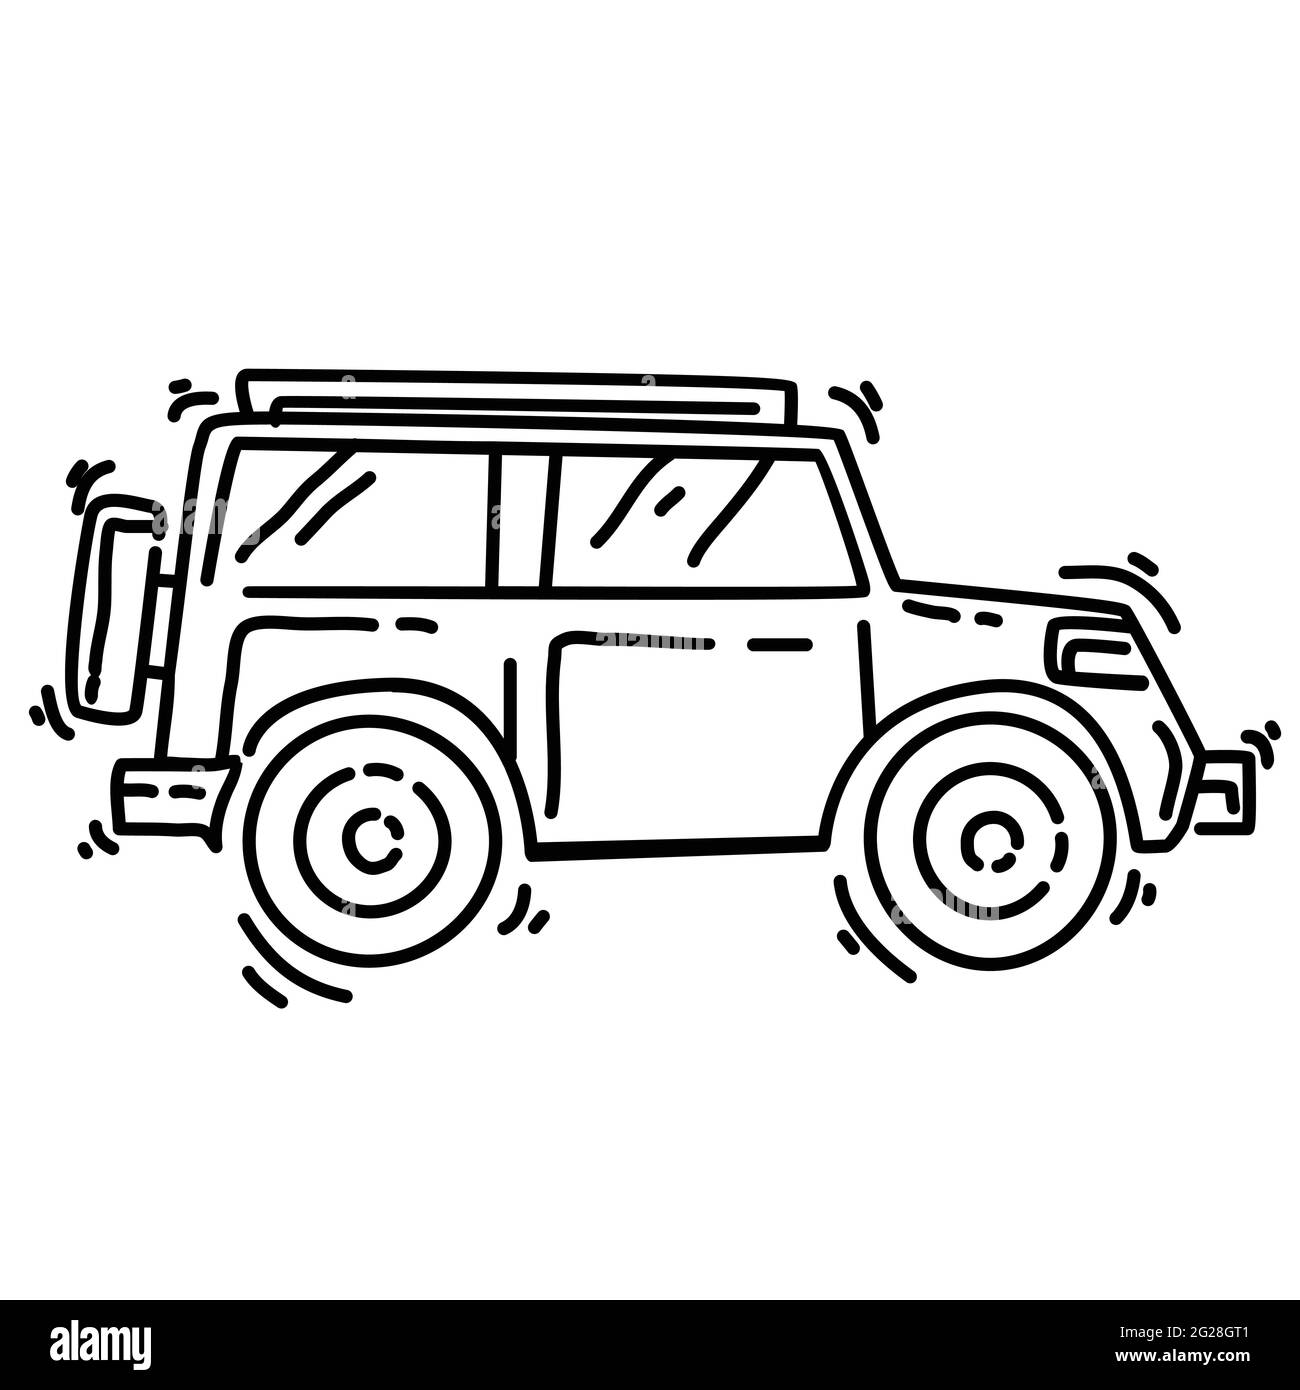 Hiking adventure car ,trip,travel,camping. hand drawn icon design, outline black, doodle icon vector icon Stock Vector